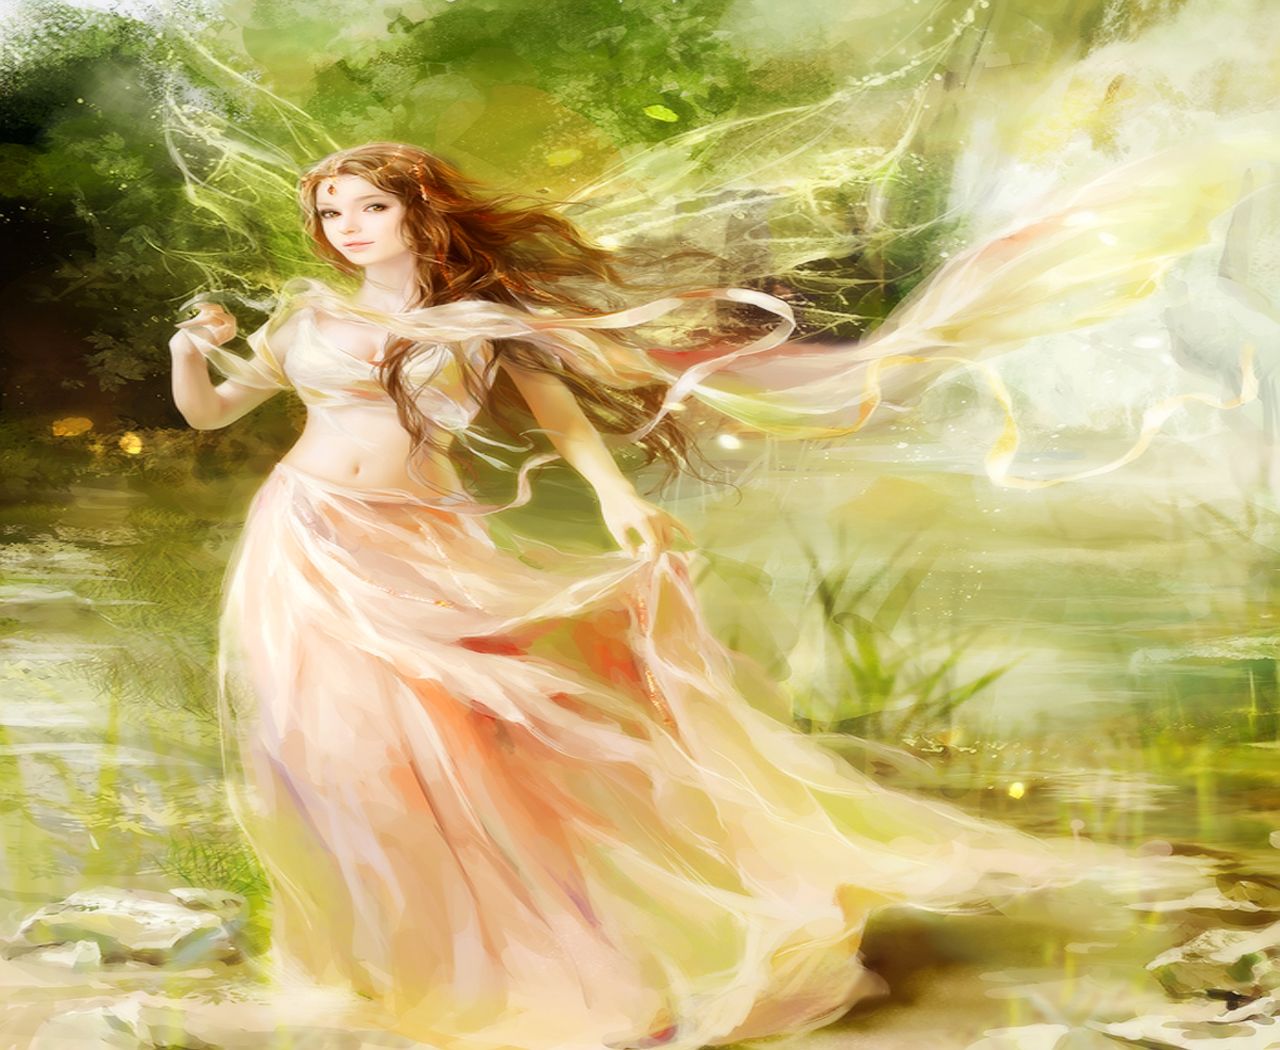 Fairy Woman, Alone, Beauty, Butterfly Wings, Cool, - Mystical Cover Photo Facebook , HD Wallpaper & Backgrounds